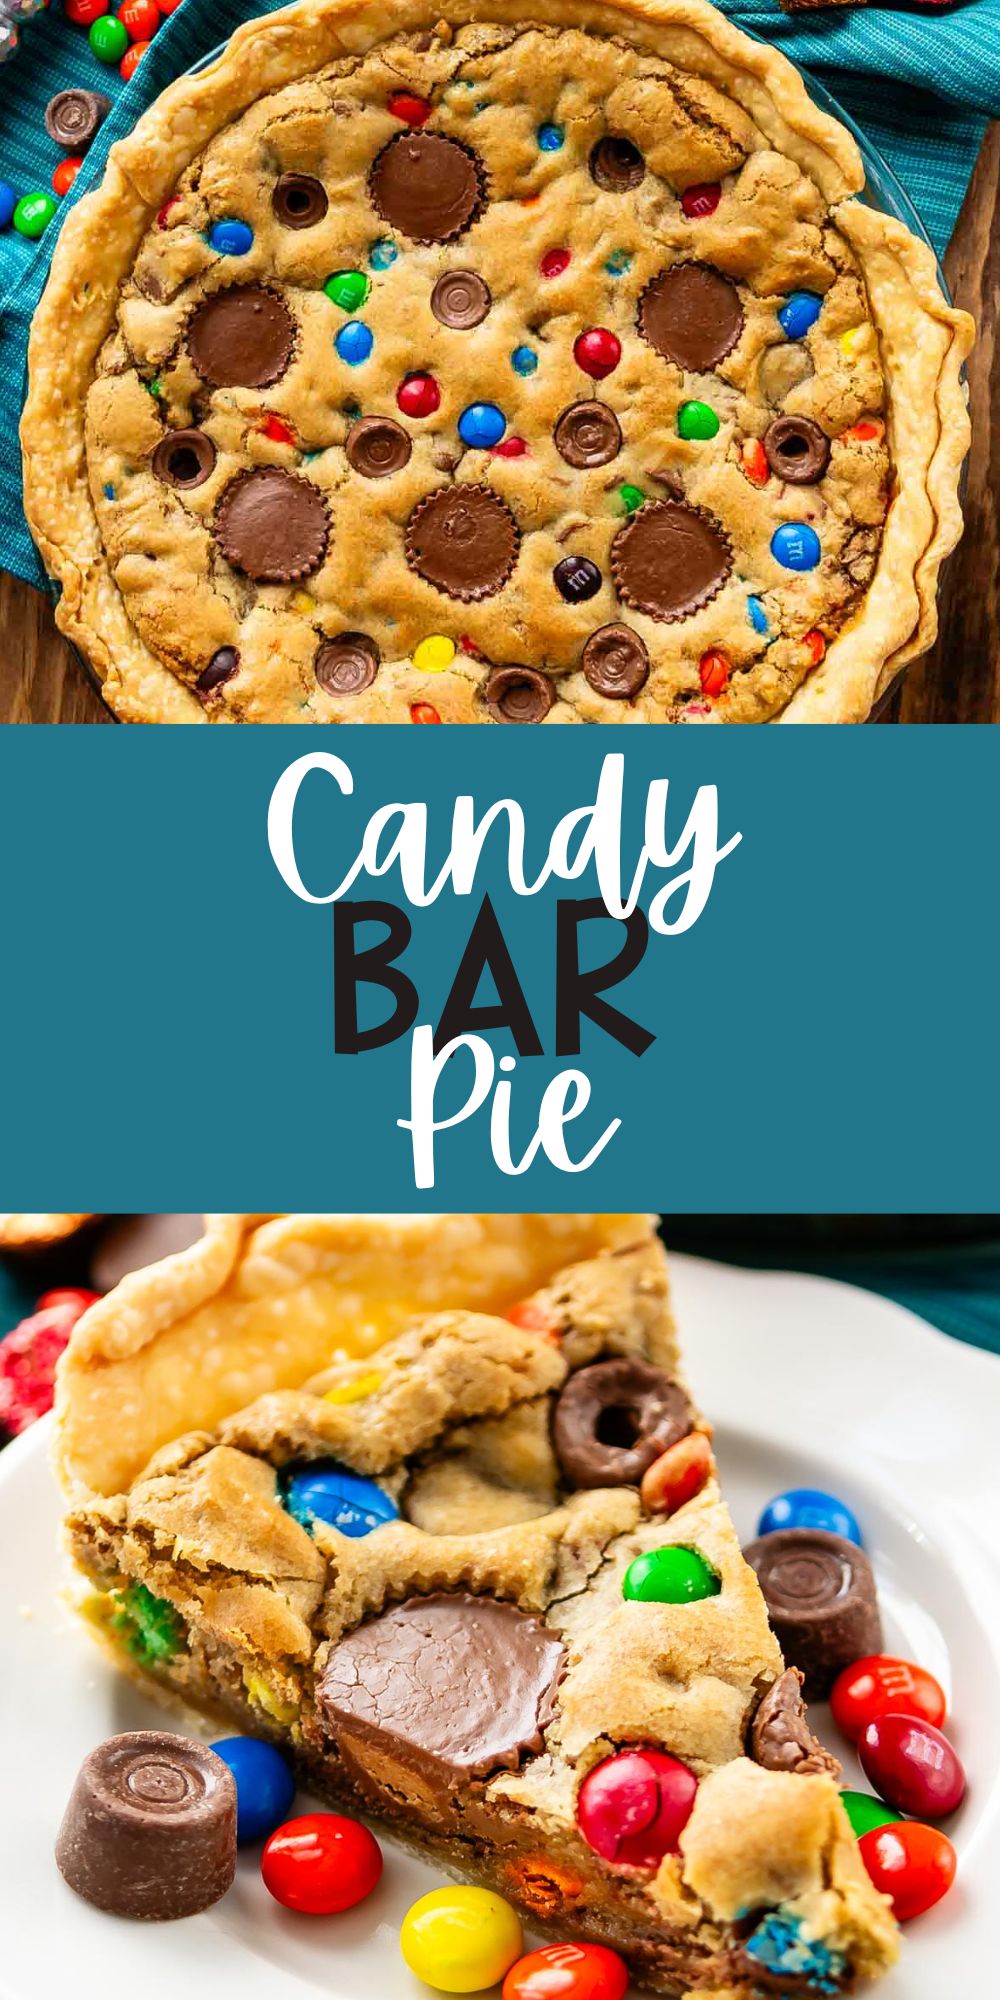 two photos of full tan pie with candy baked in and candy around the pie with words on the image.